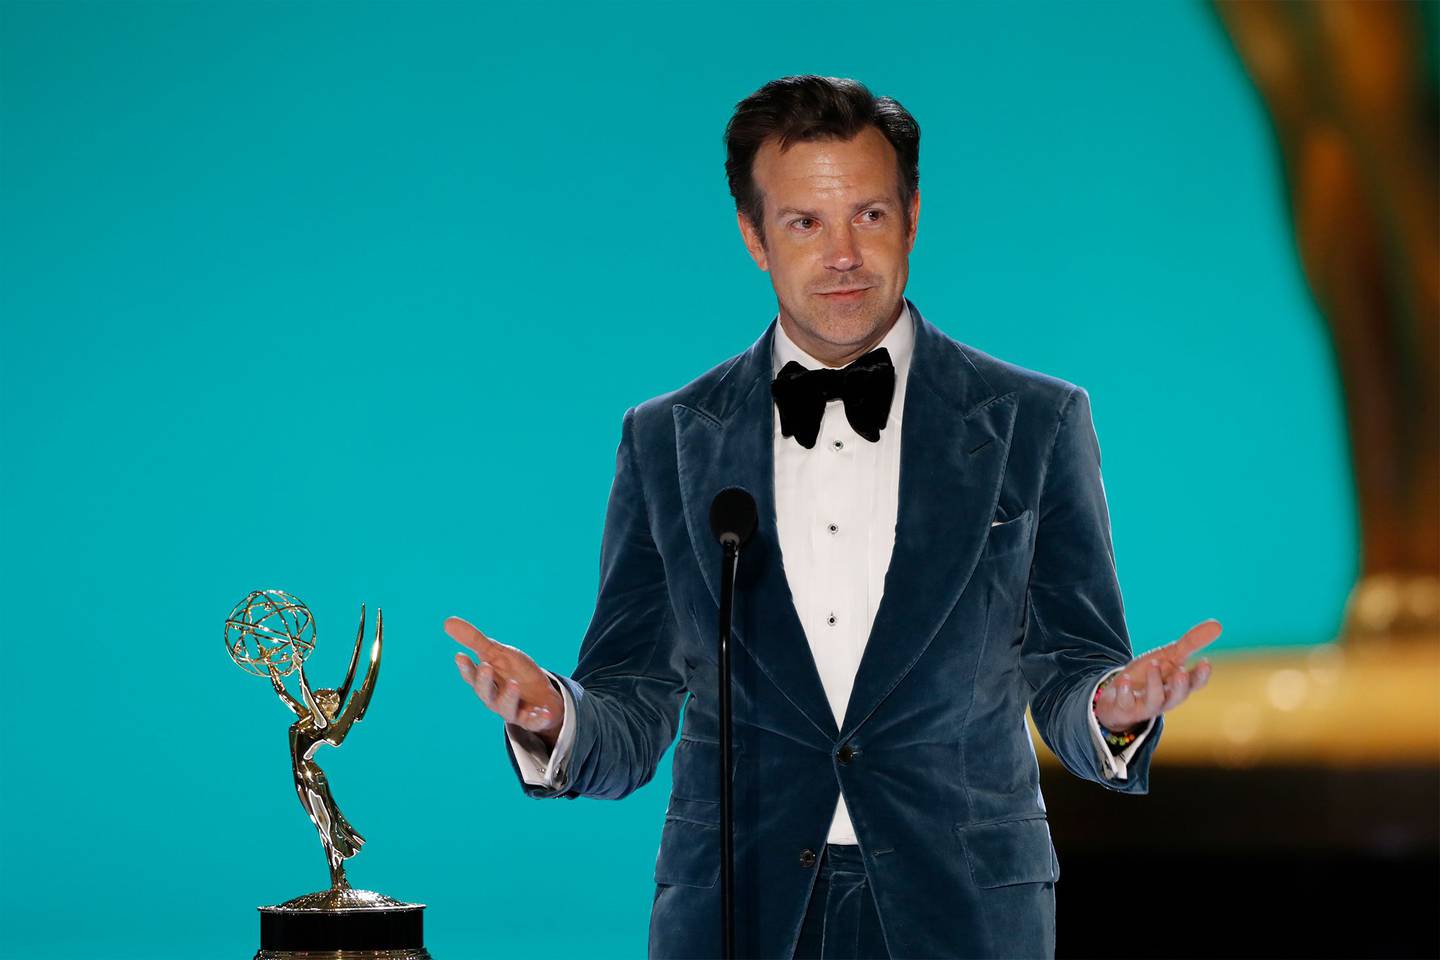 Jason Sudeikis from 'Ted Lasso' appears at the 73RD EMMY AWARDS, broadcast Sunday, Sept. 19 2021.